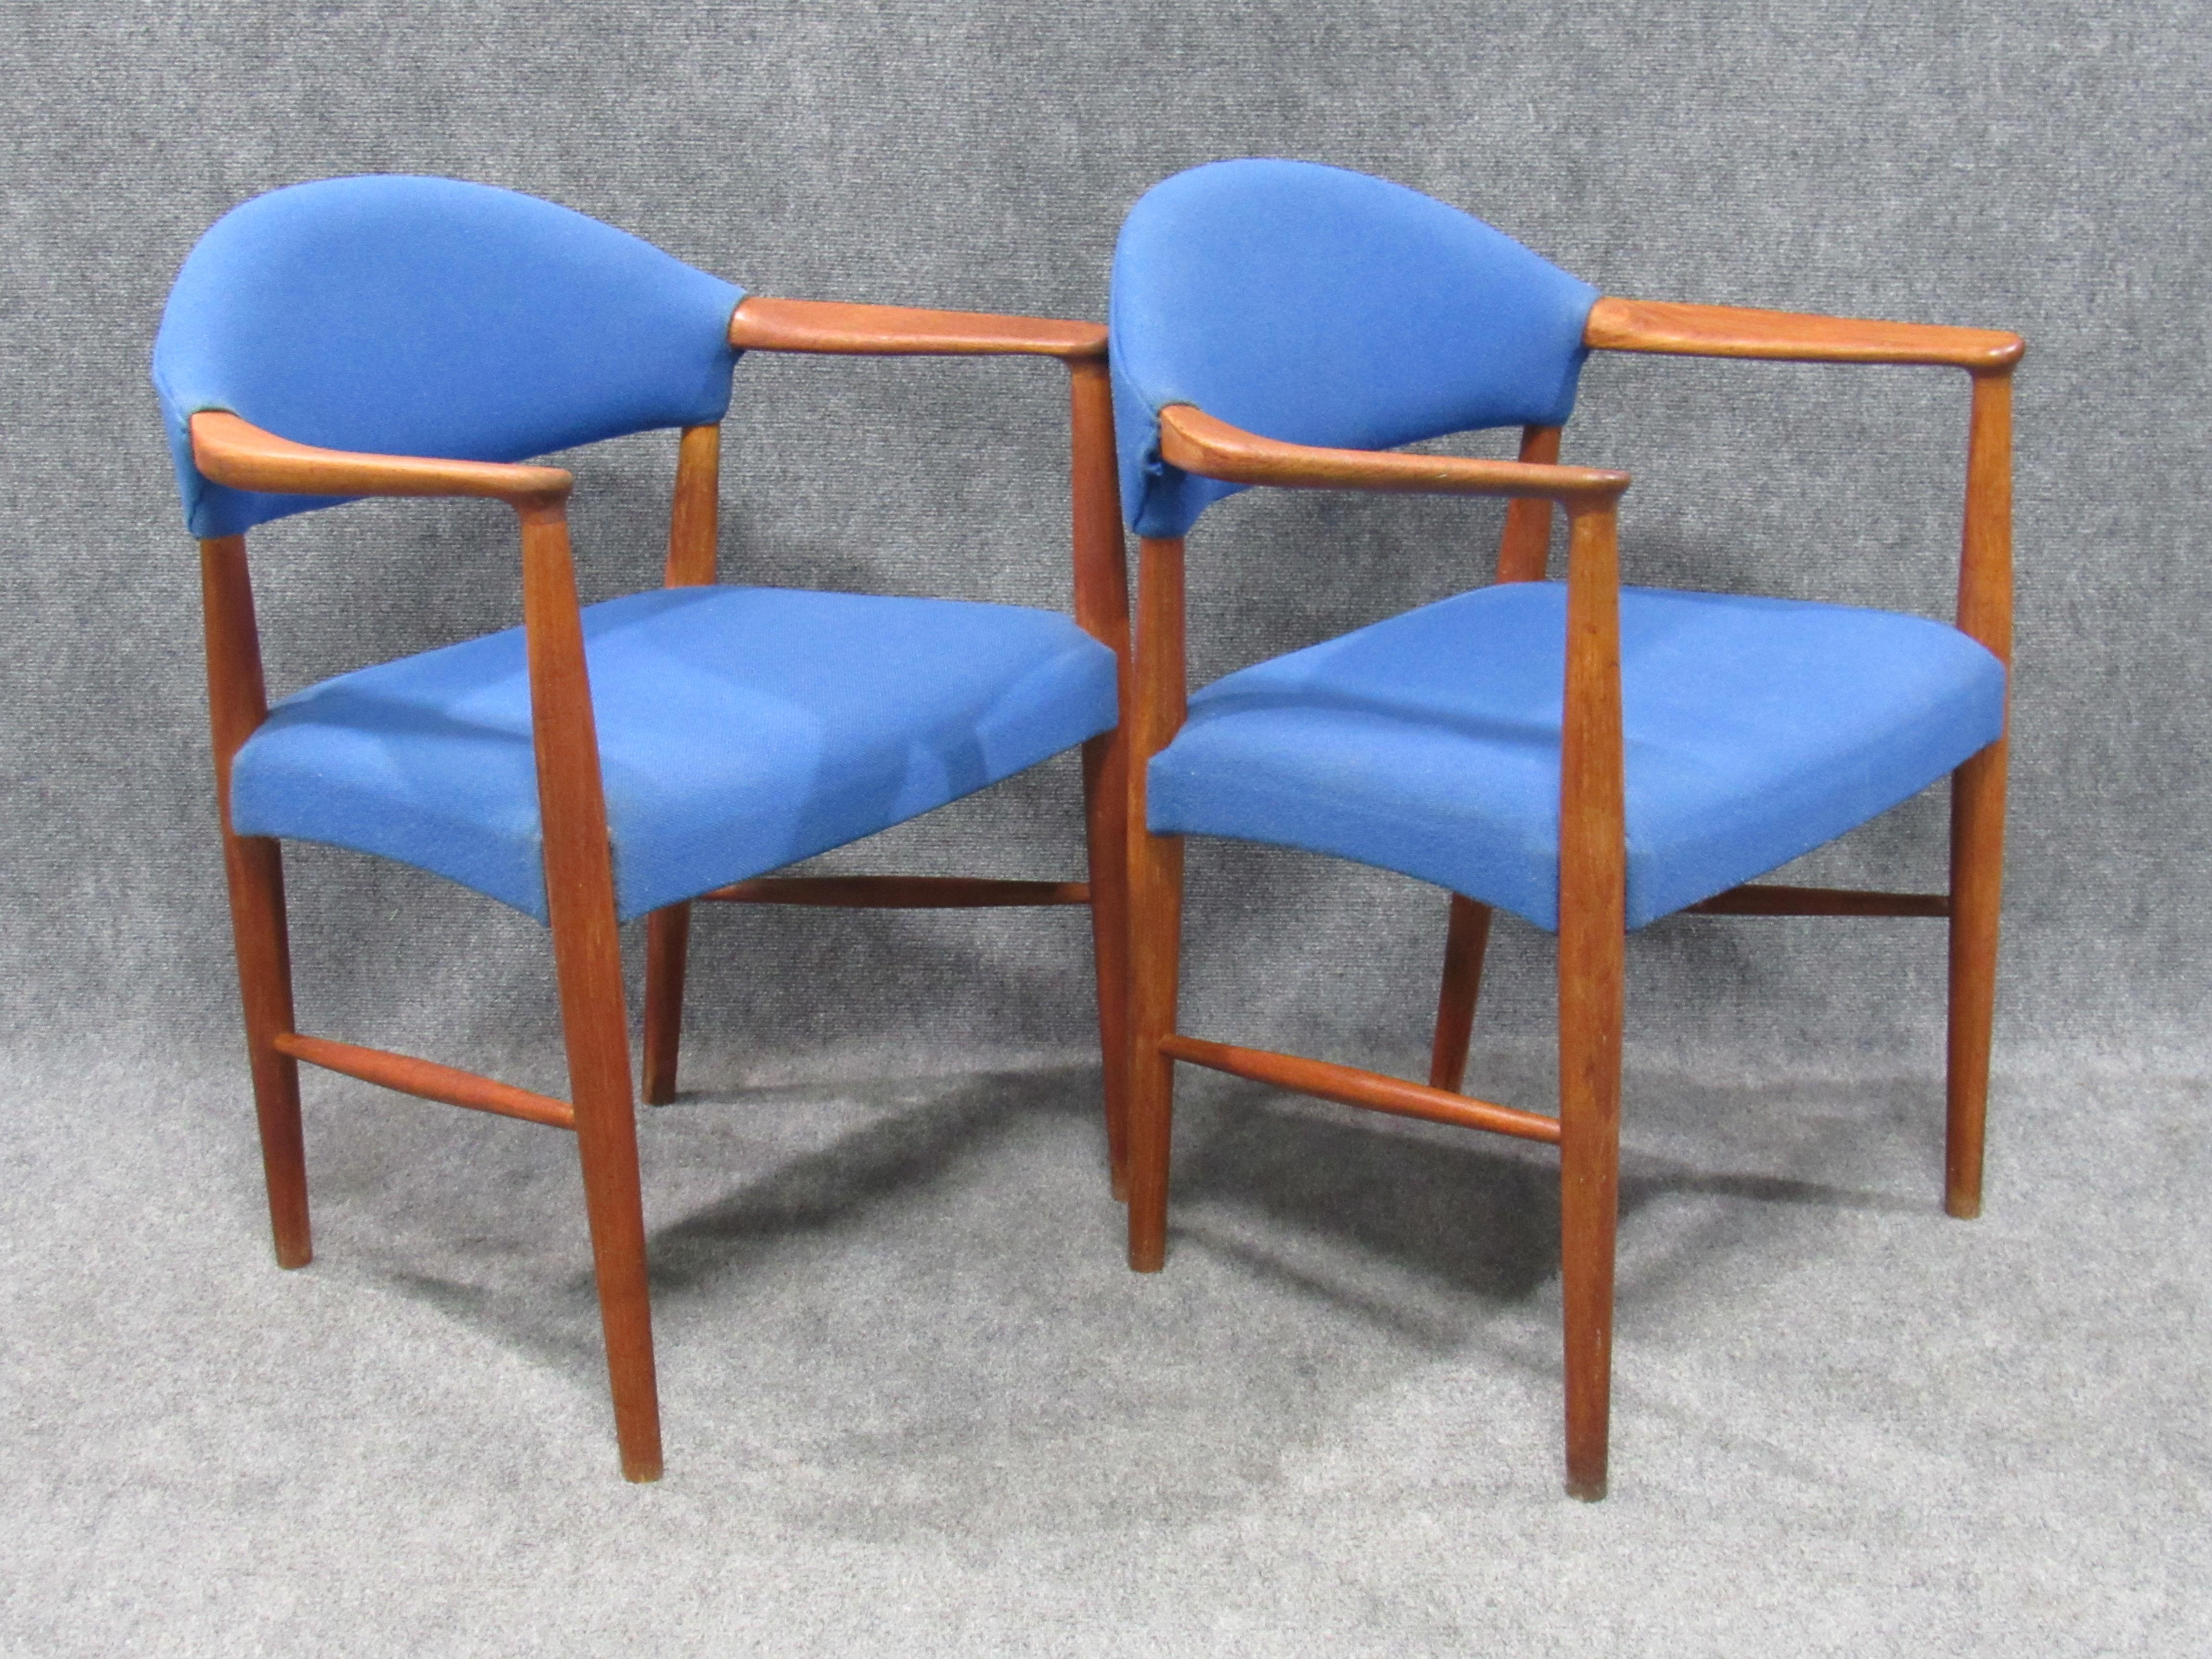 Danish Mid-Century Modern Teak and Blue Wool Armchairs Attributed to Hans Wegner For Sale 16